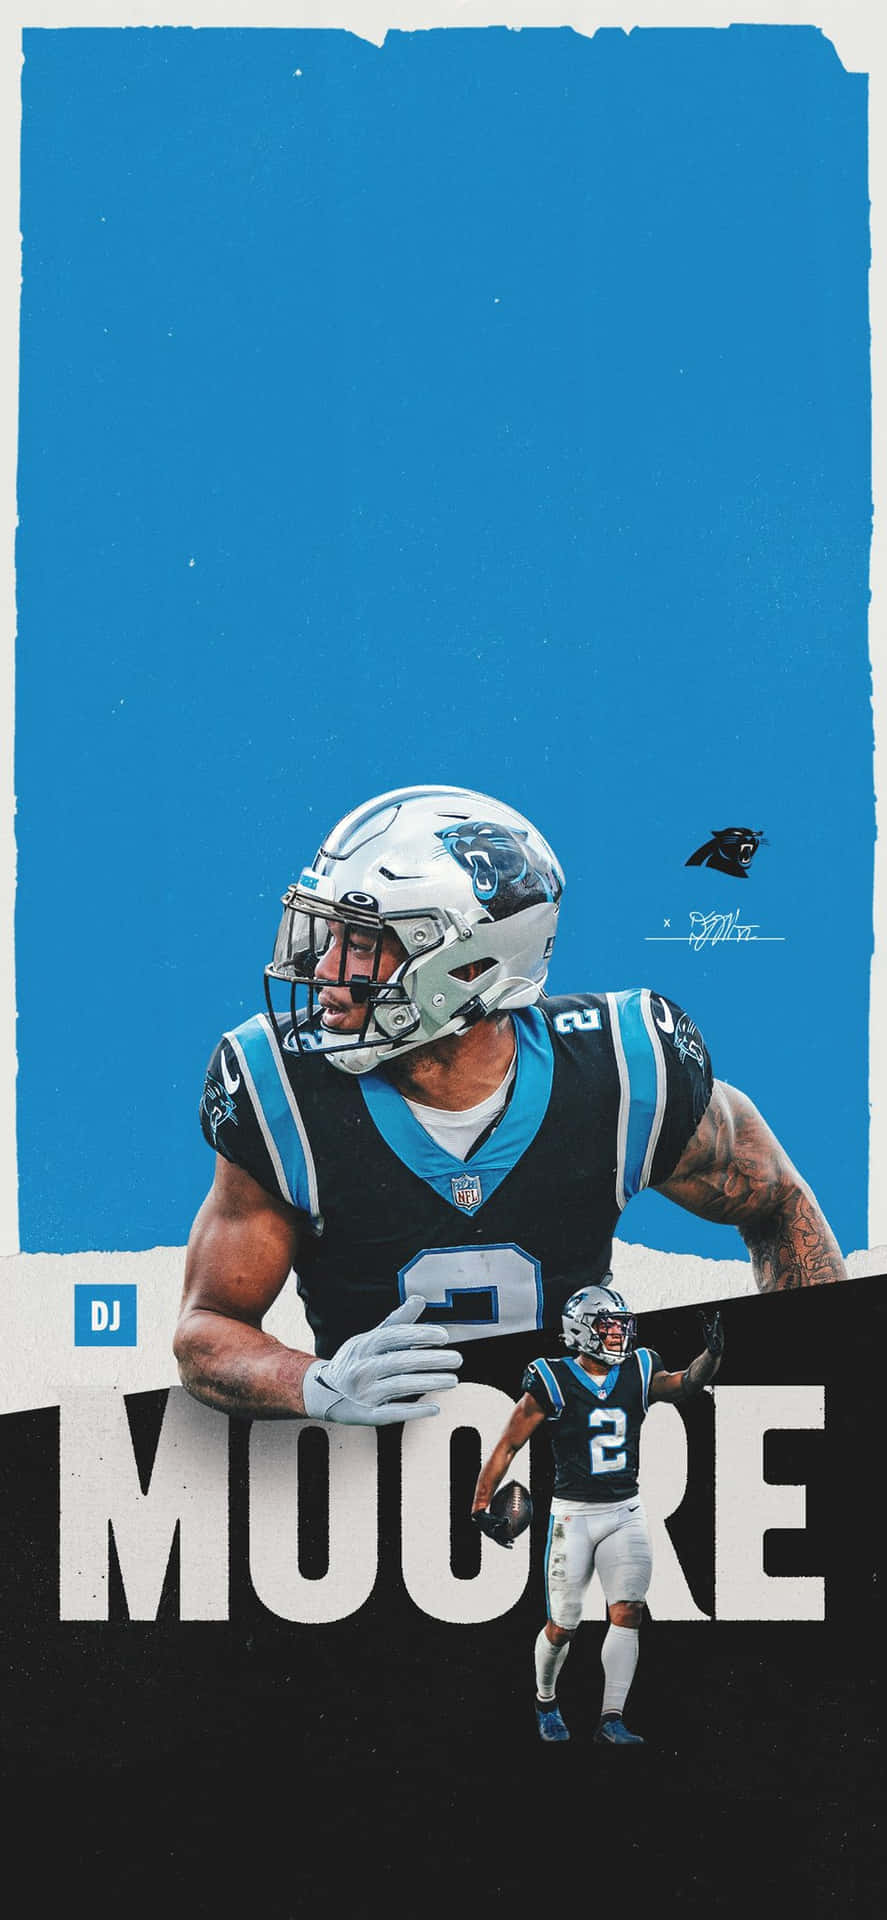 Panthers extend WR DJ Moore with reported 4year 73 million deal